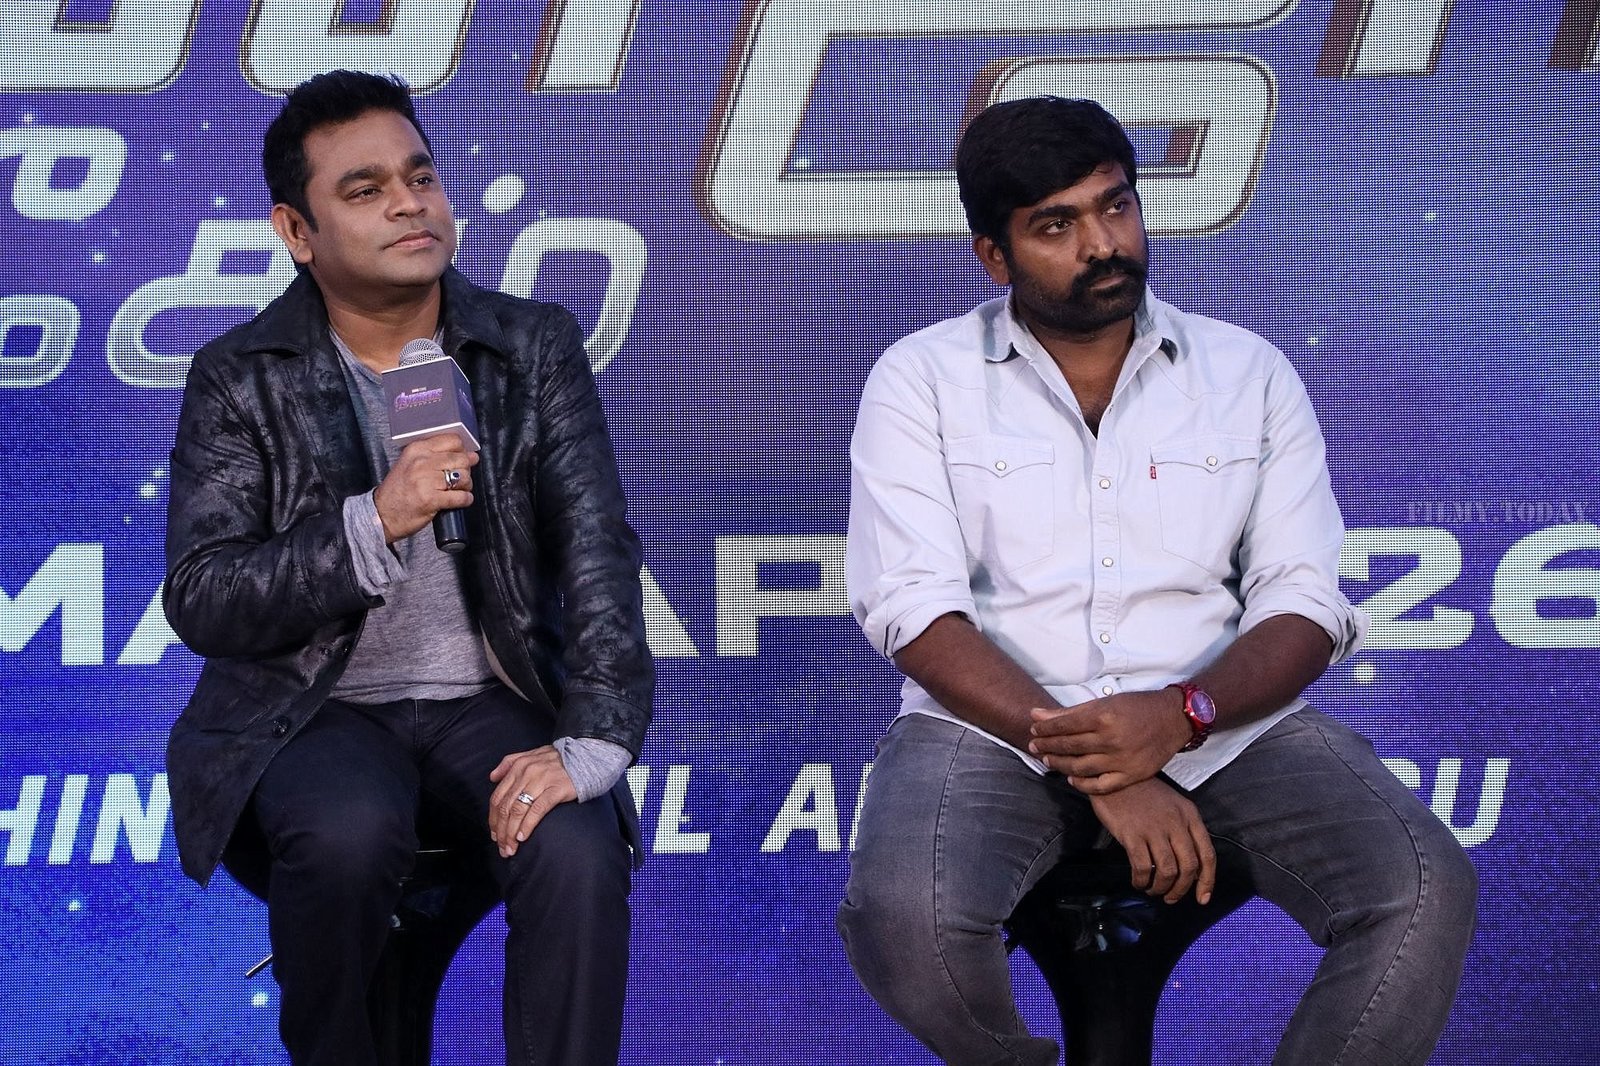 Avengers End Game Tamil Version Press Meet Photos | Picture 1641707